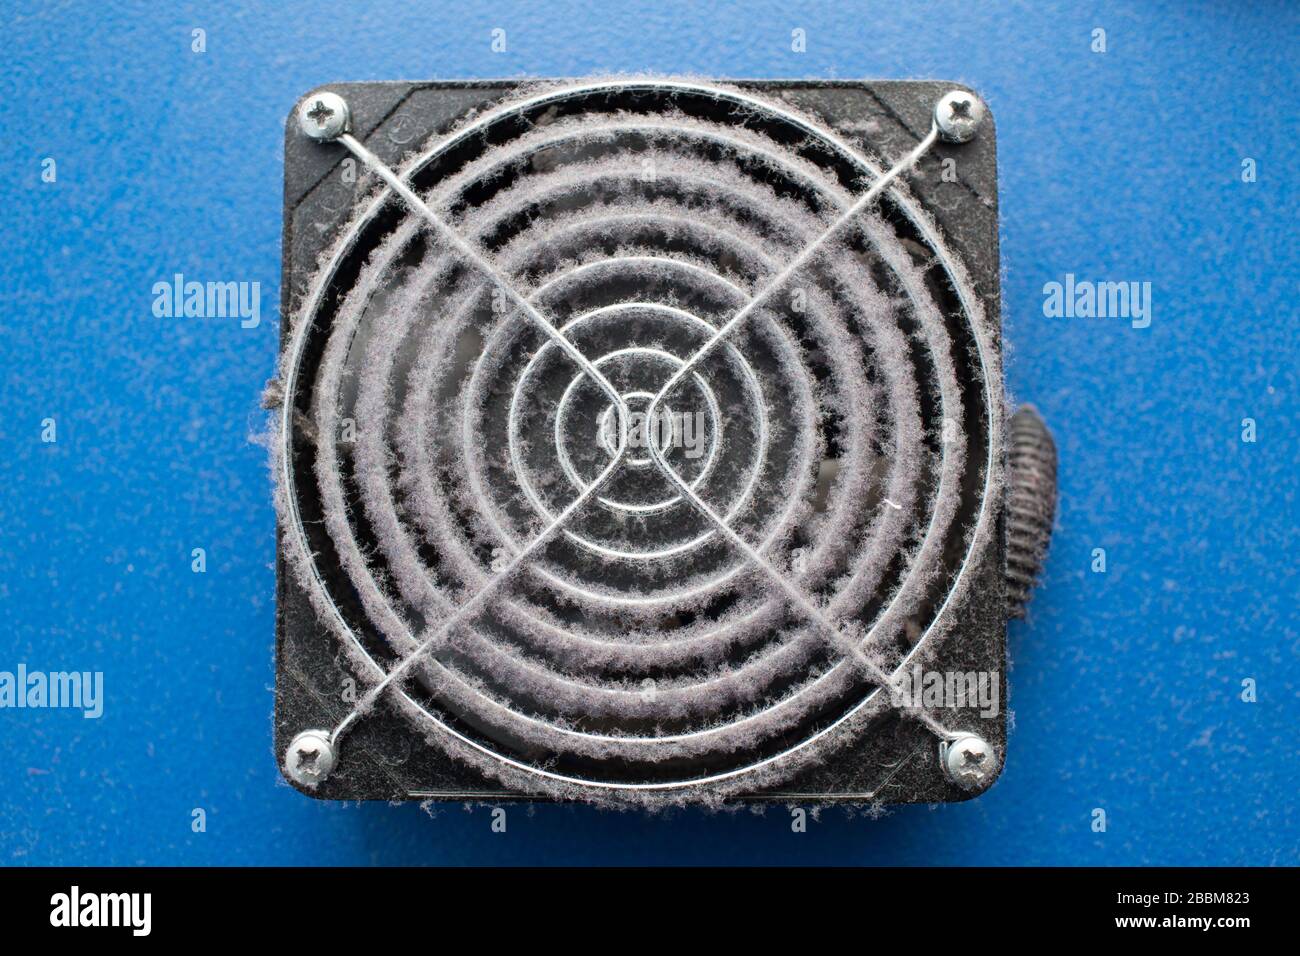 Dusty grill cooling fan system Stock Photo